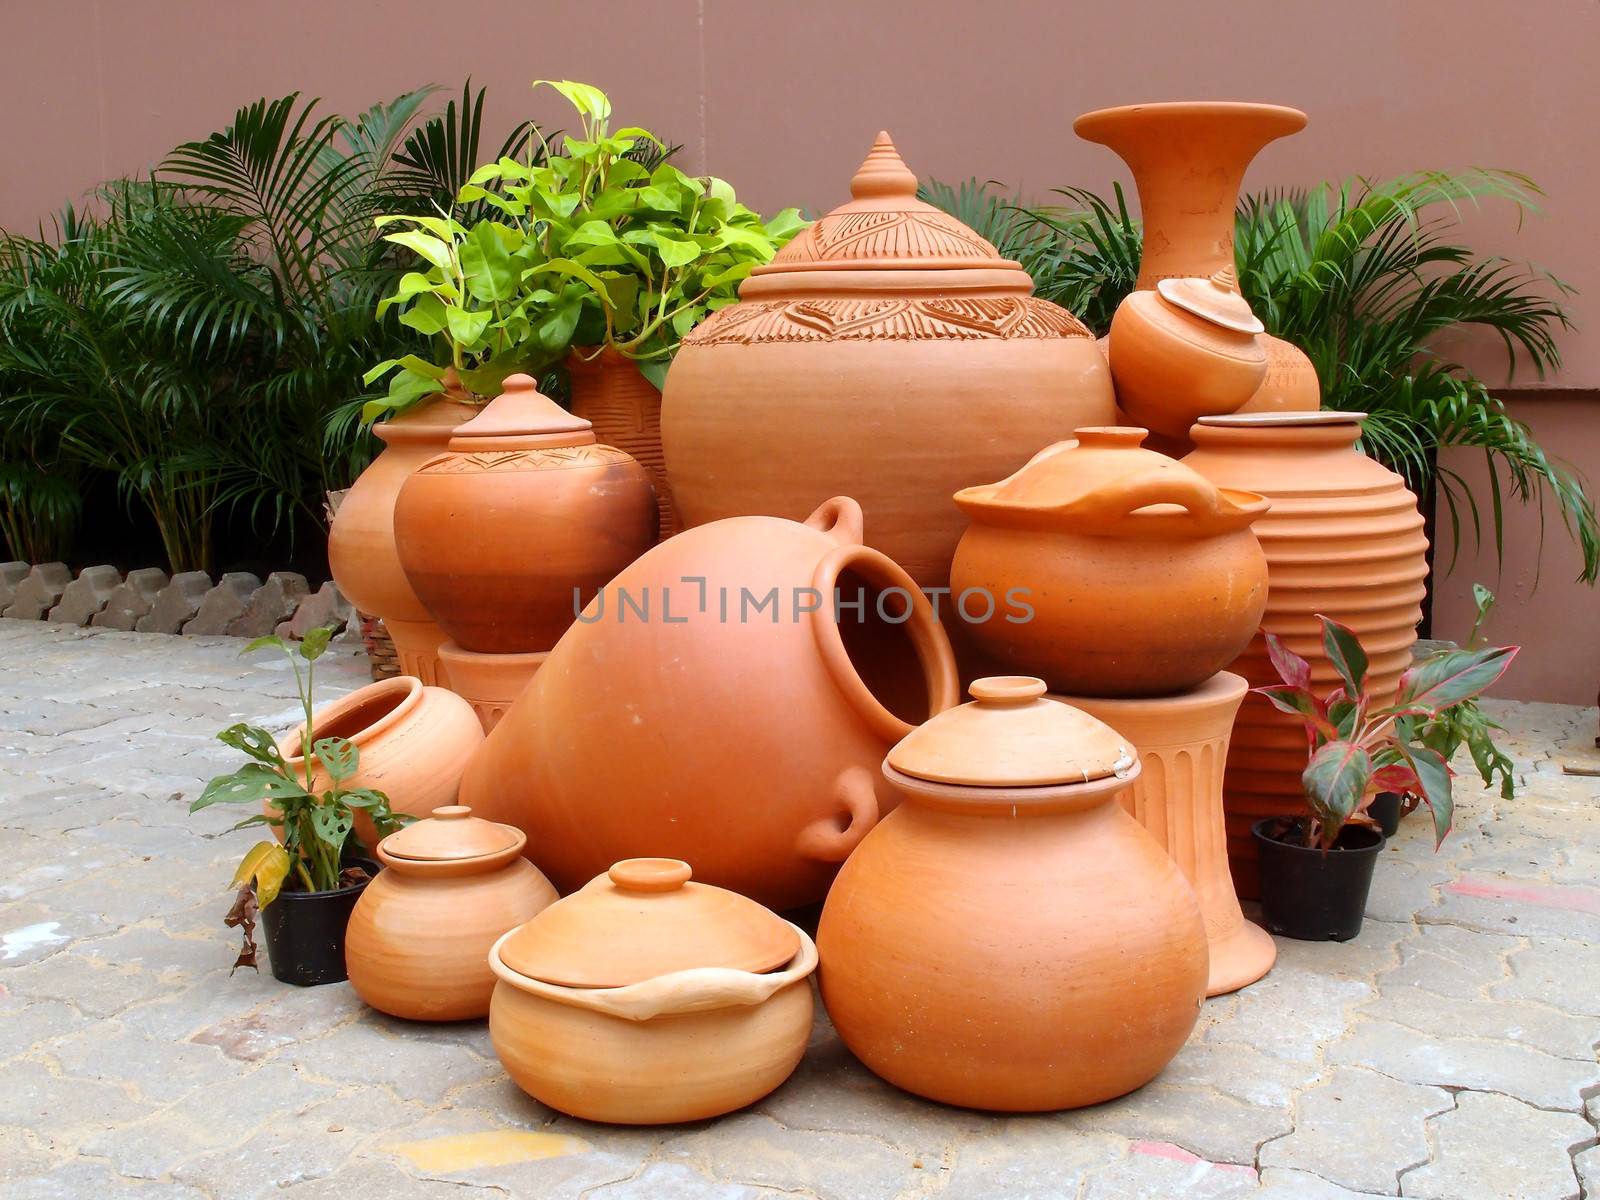 Traditional pottery decorate in garden